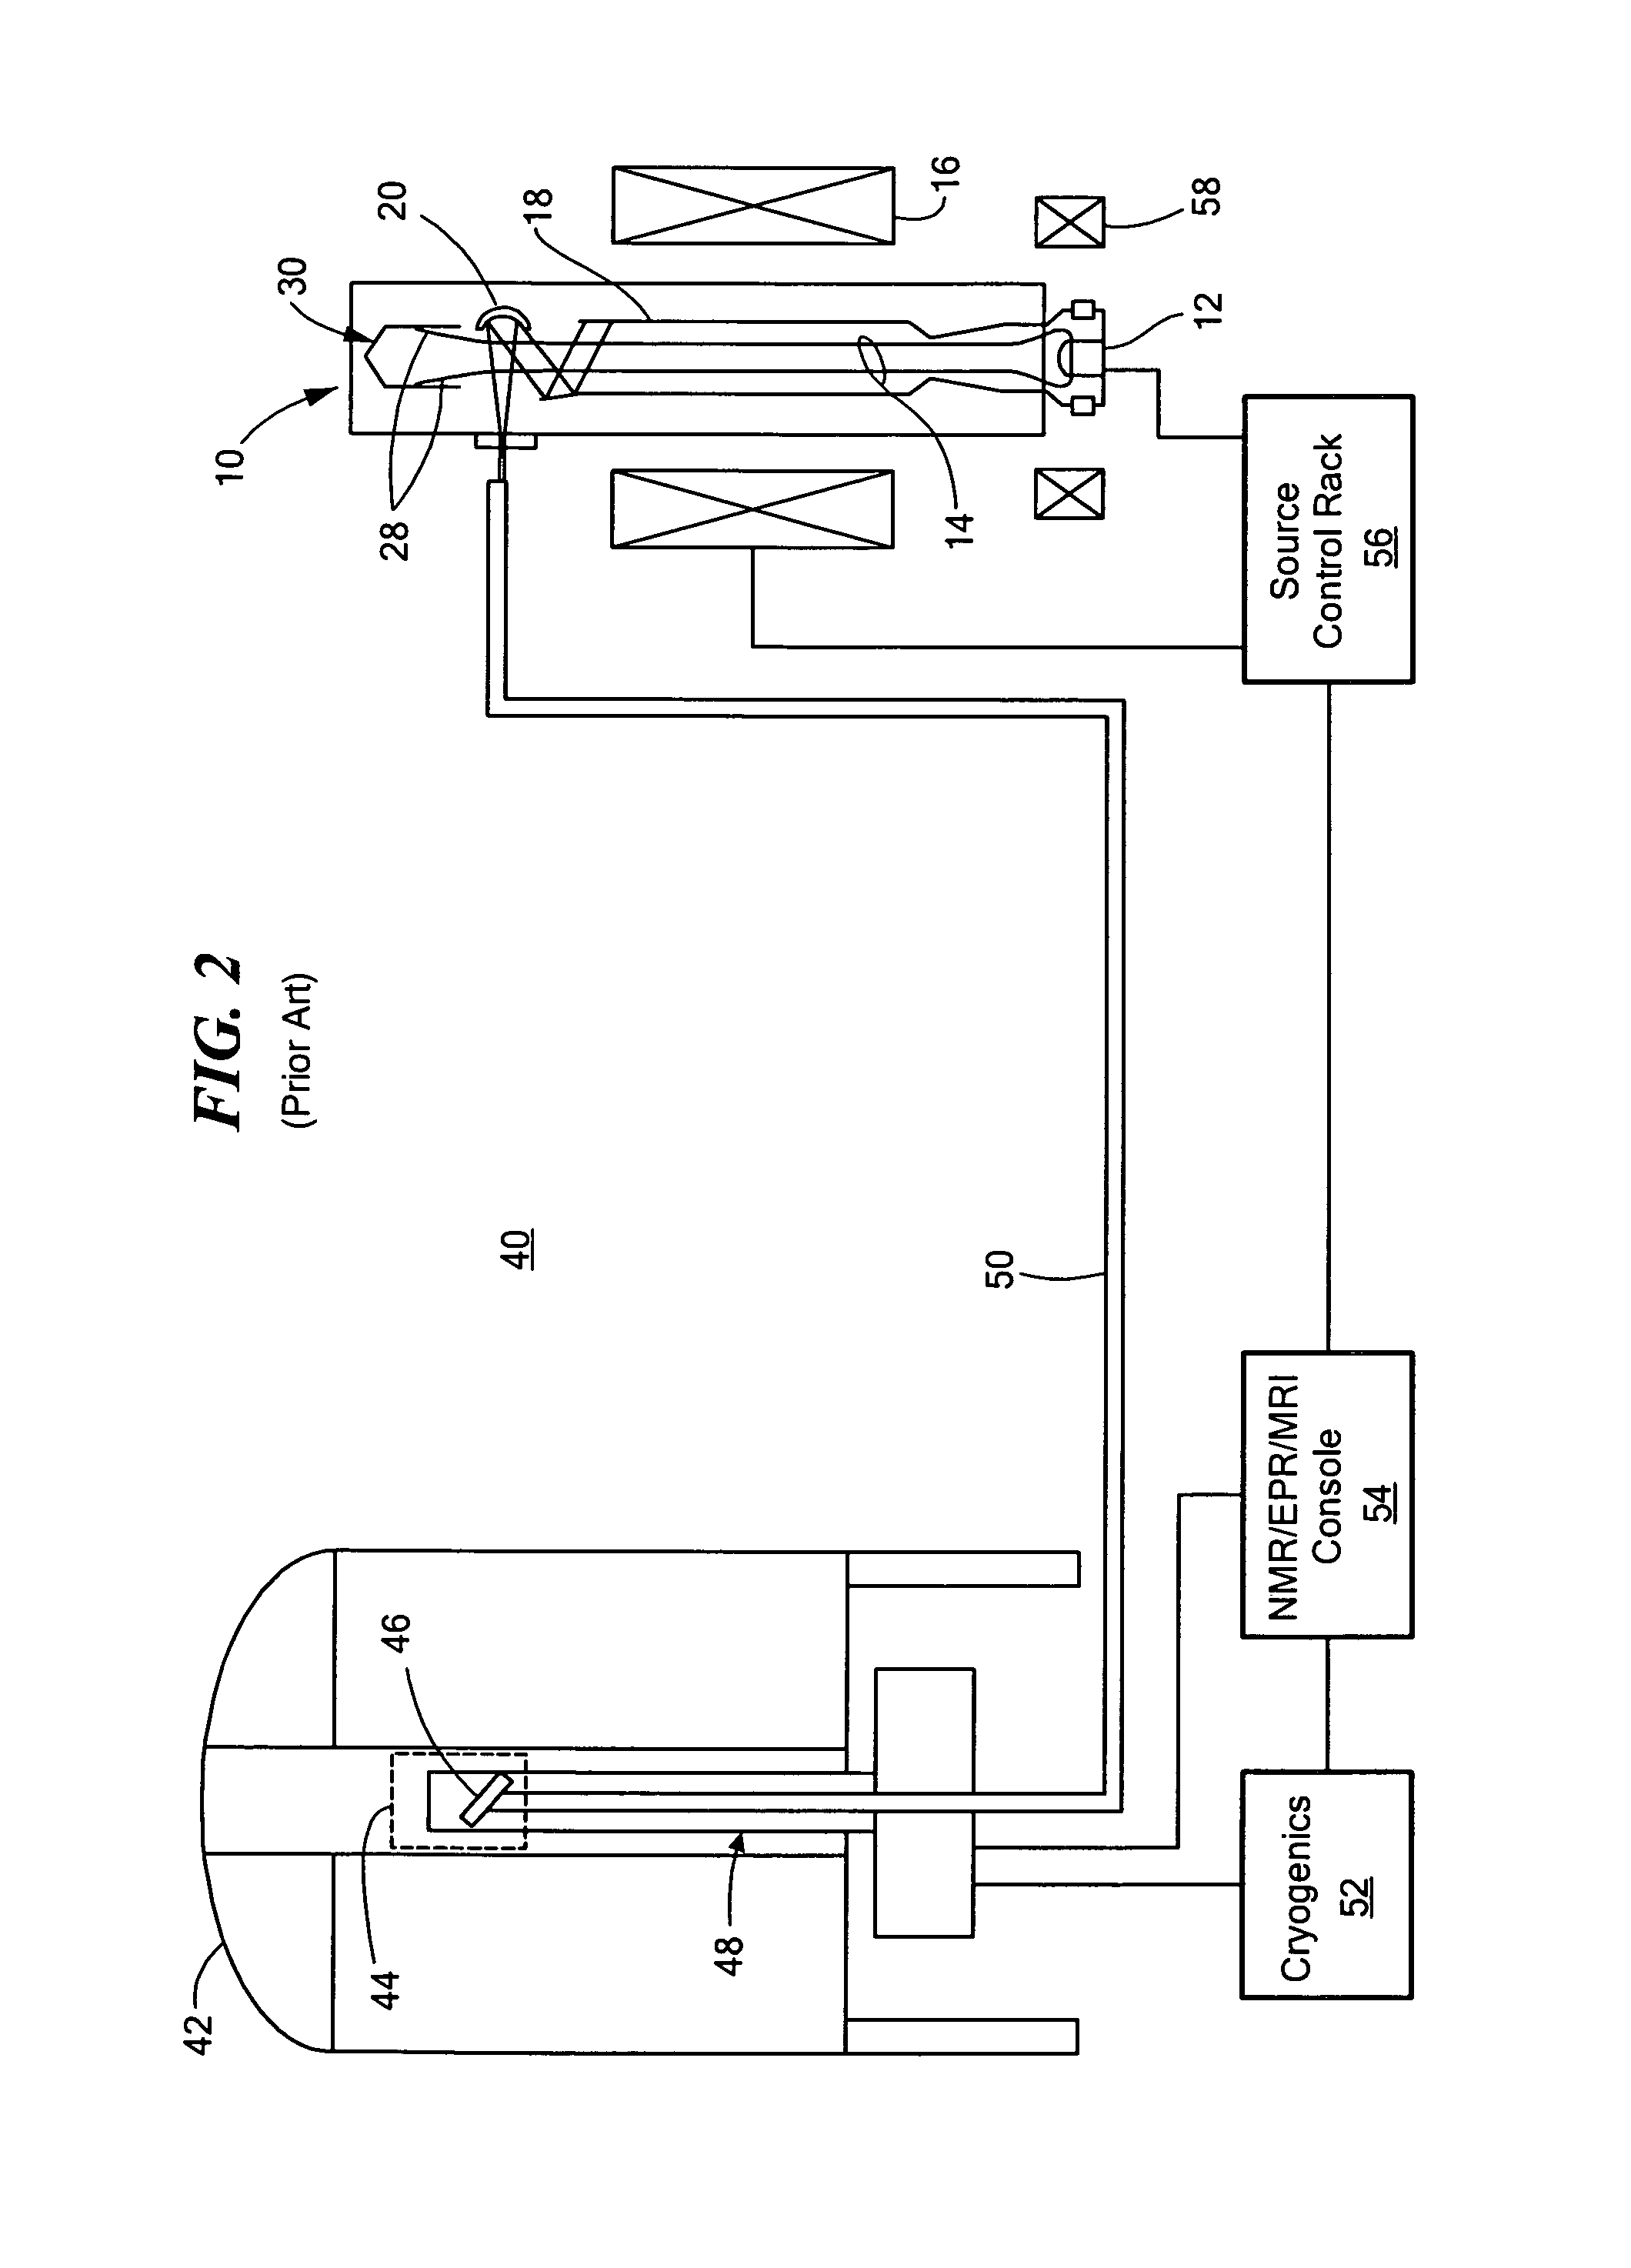 Integrated high-frequency generator system utilizing the magnetic field of the target application